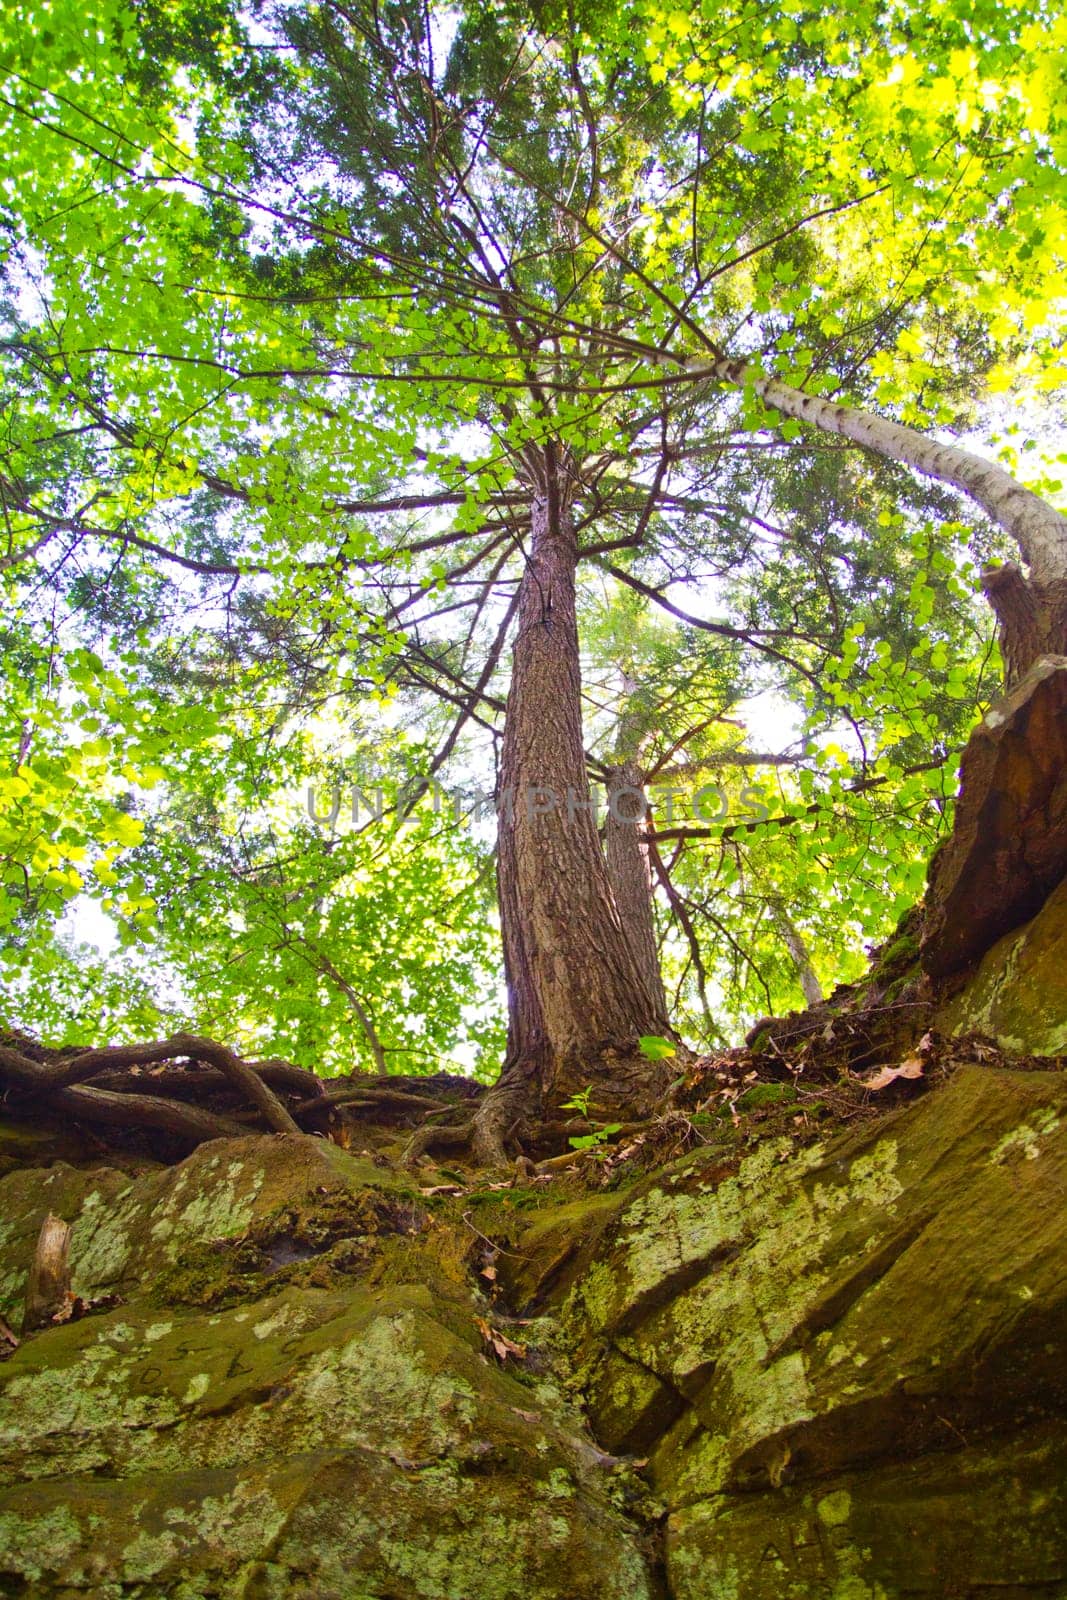 Upward View of Towering Tree in Verdant Michigan Forest by njproductions